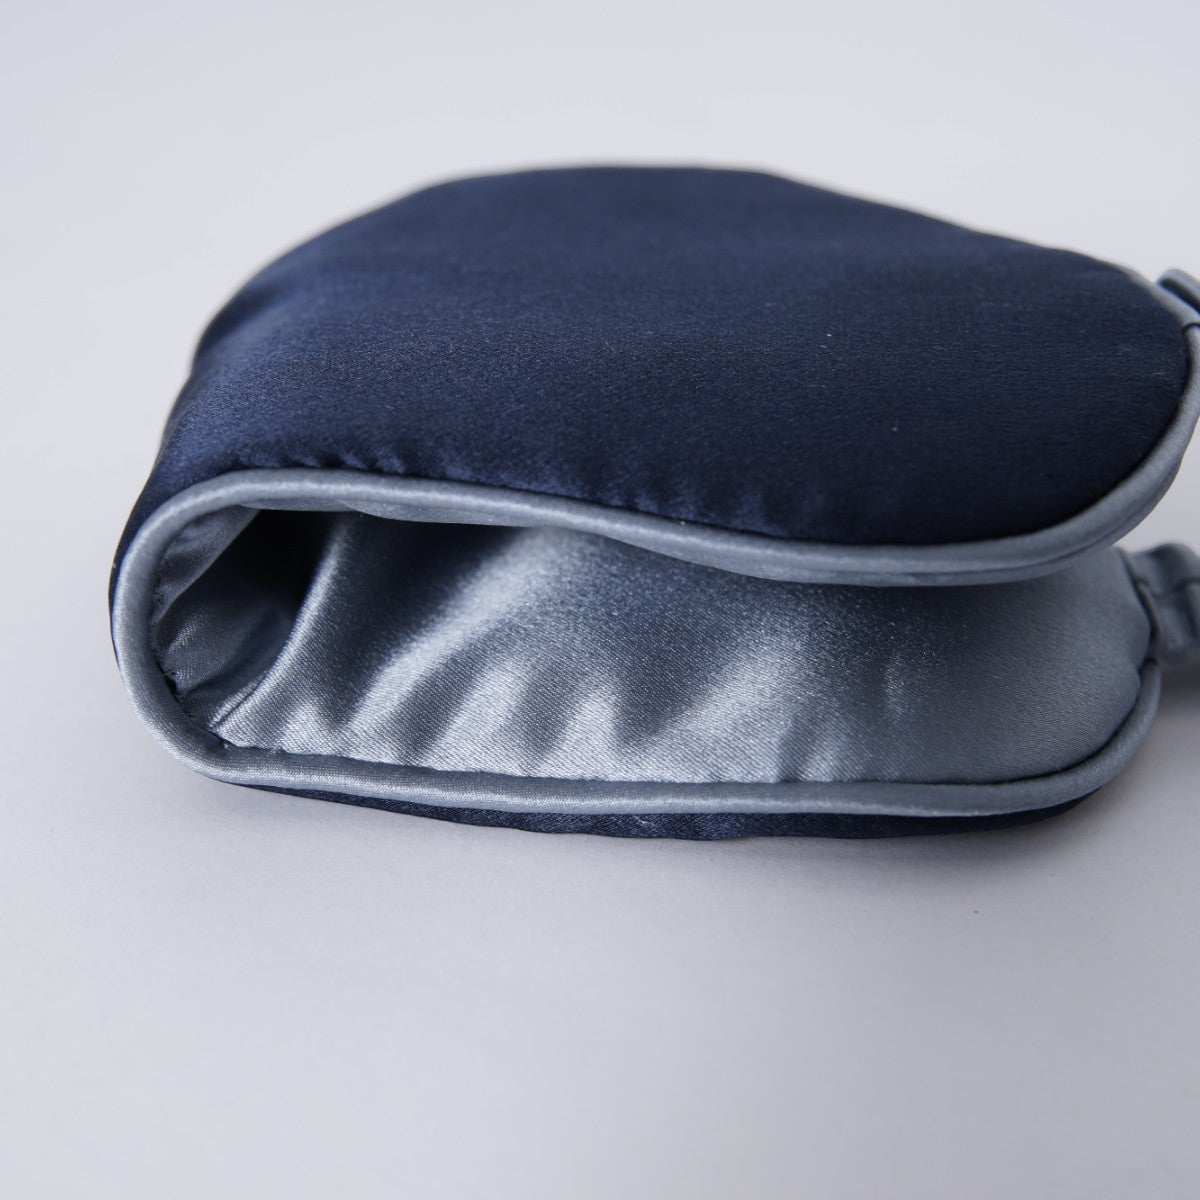 Contrast Colors Mulberry Silk Sleep Mask